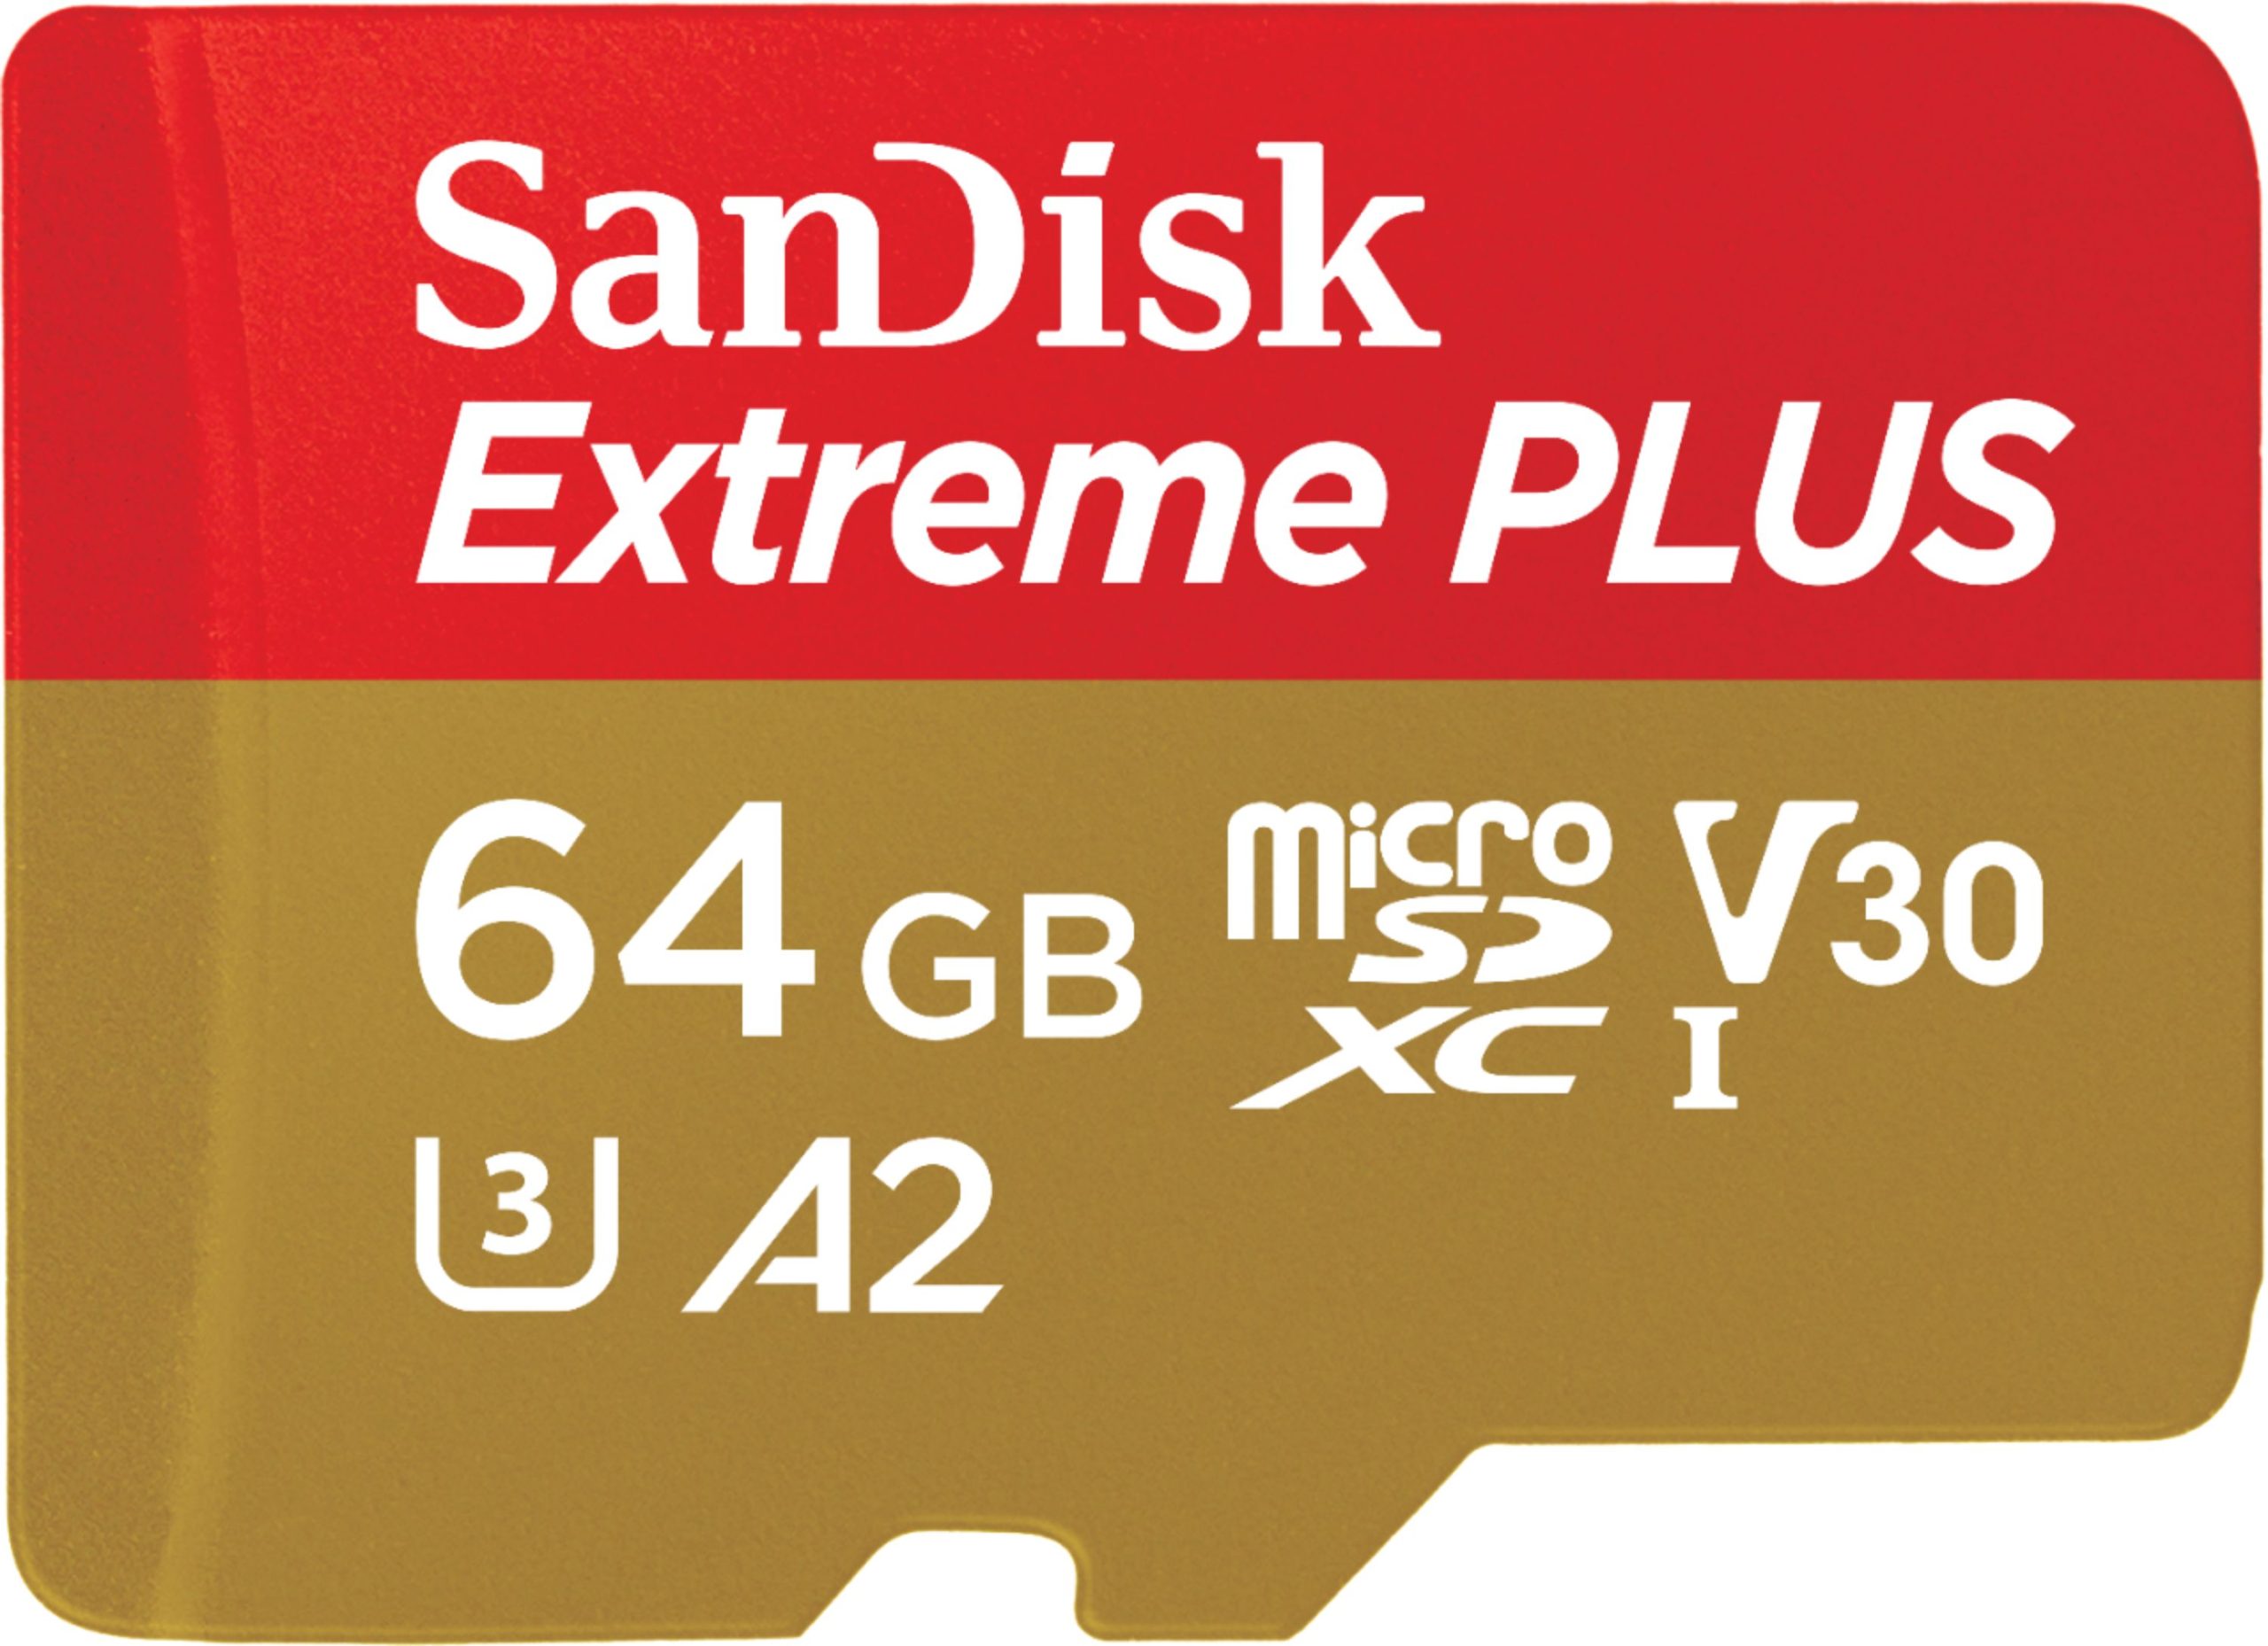 SanDisk – Extreme PLUS 64GB microSDXC UHS-I Memory Card – Just $14.99 at Best Buy